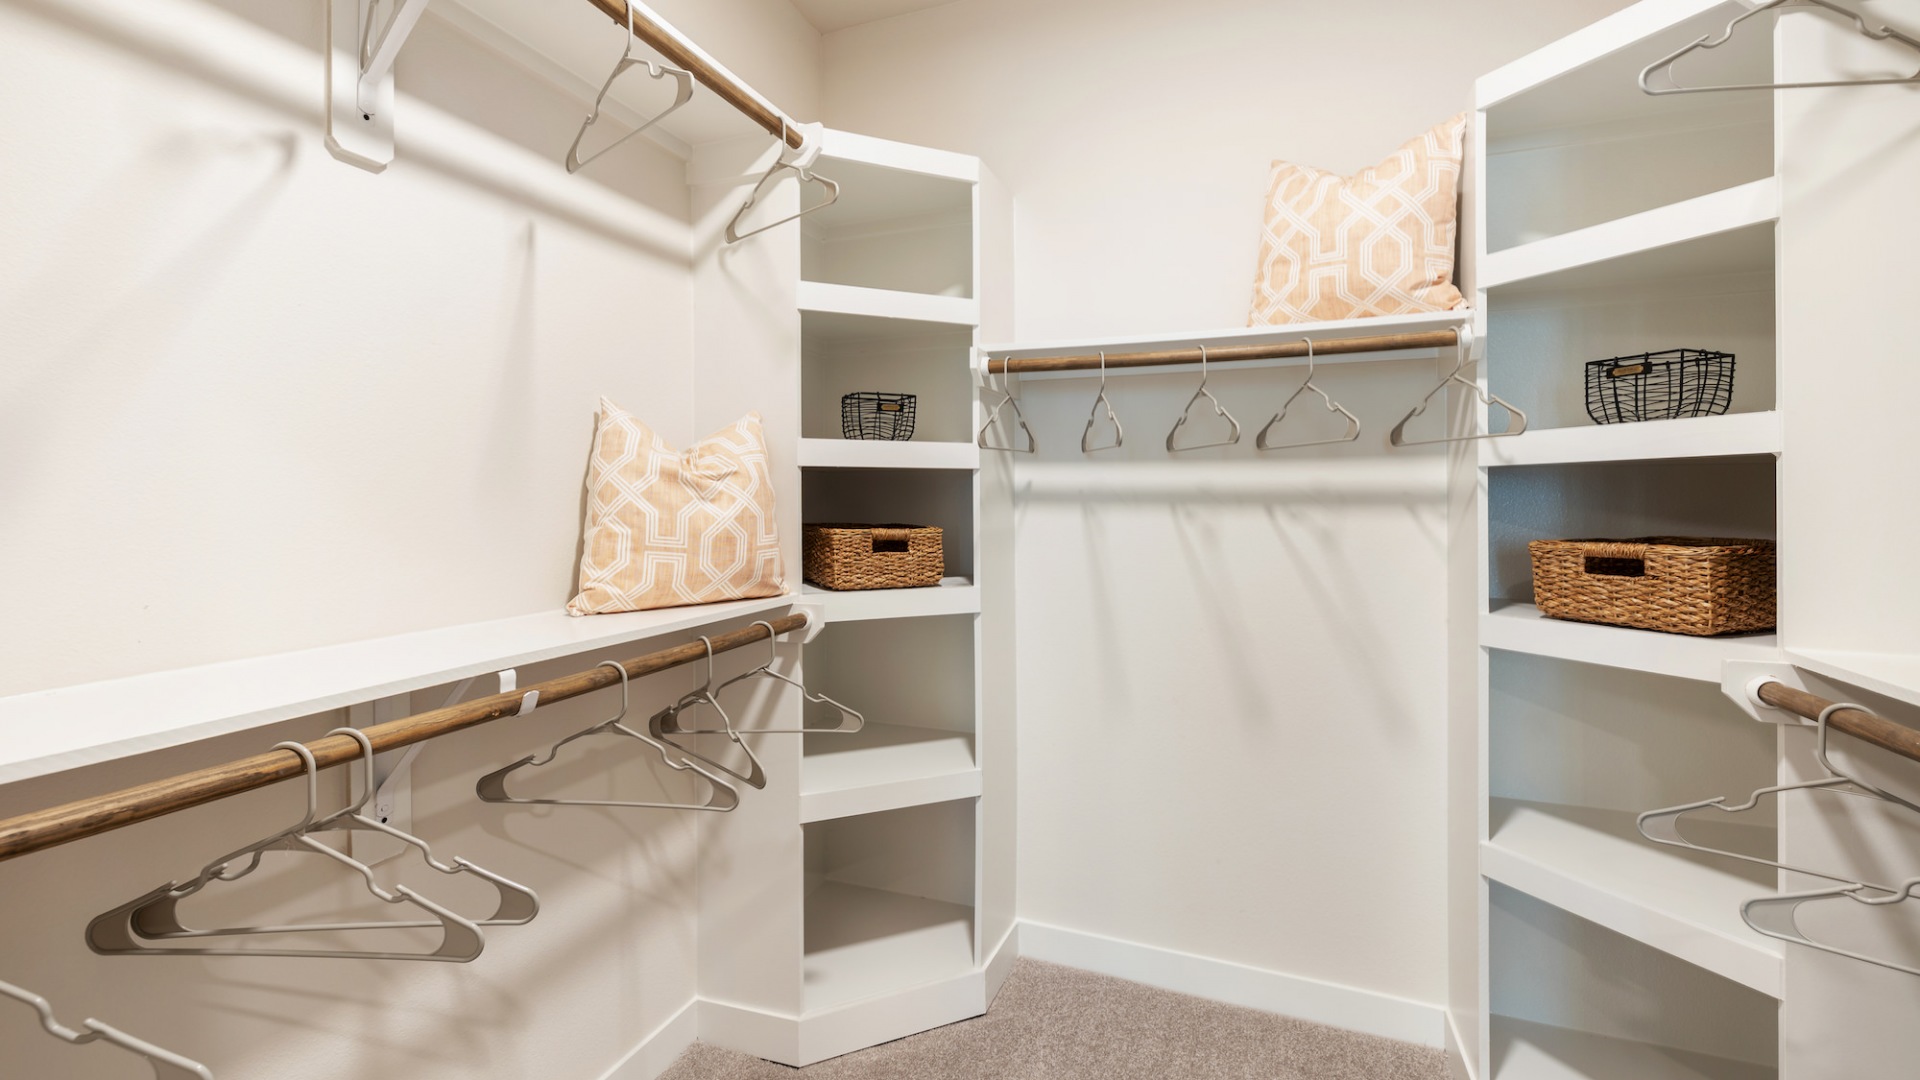 Walk in closet at our apartments in Houston, featuring clothes hangers, cubbies, and carpeted floors.